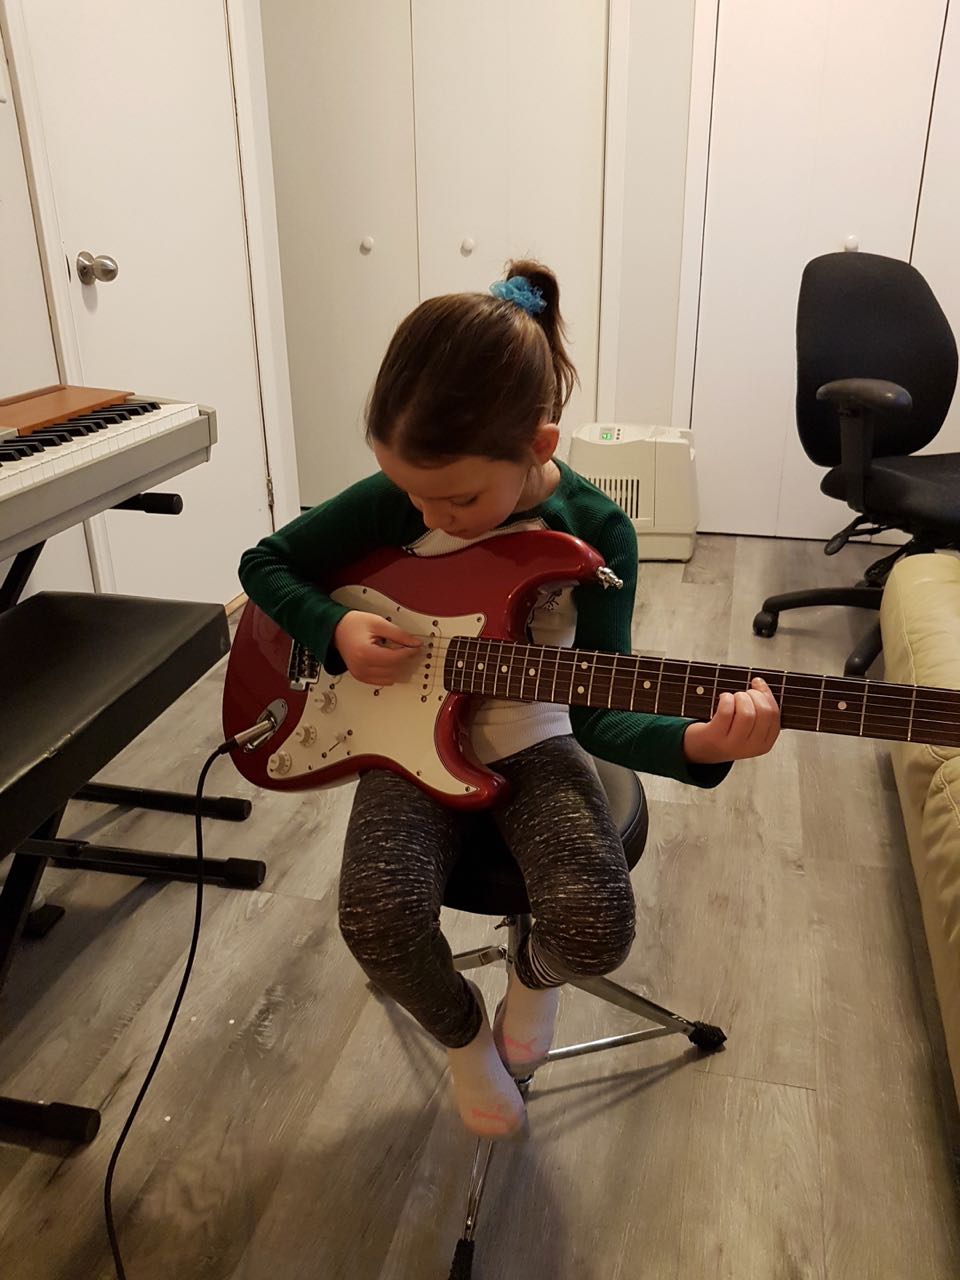 A young girl attends a guitar lesson with Modern Music studio in Barrie, Ontario